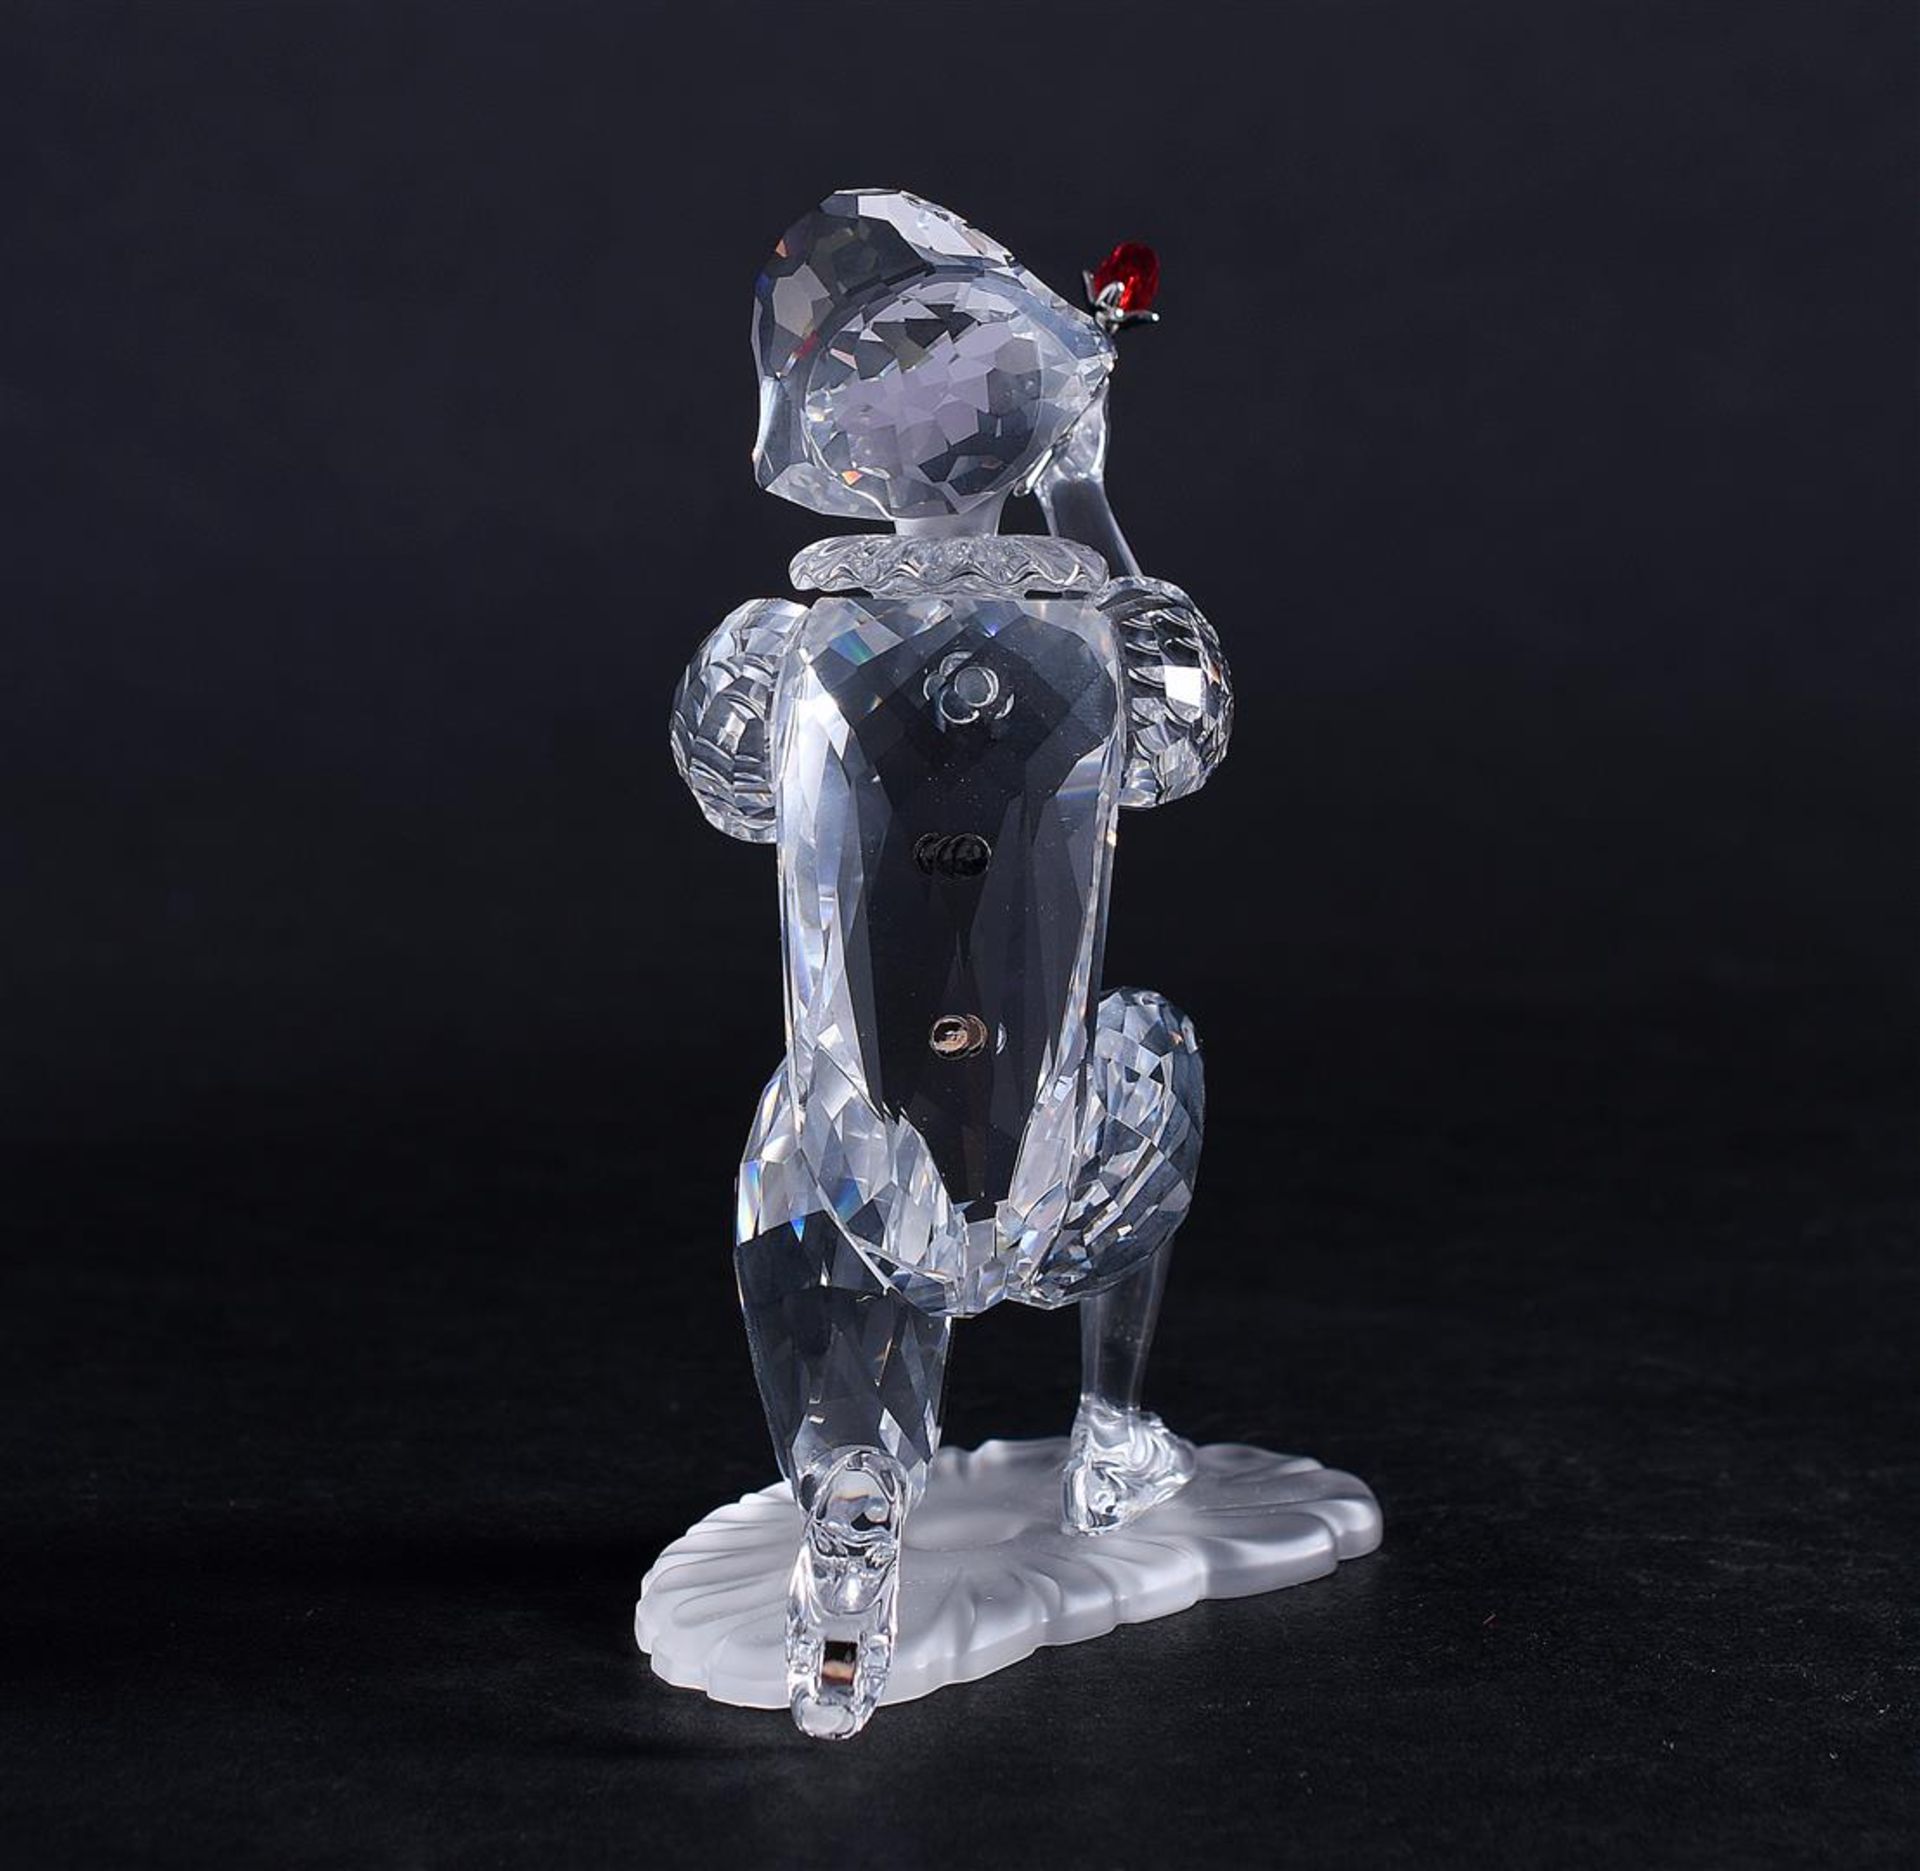 Swarovski SCS, annual edition 2001 harlequin, Year of issue 2001, 254044. Includes original box.
H.  - Image 6 of 7